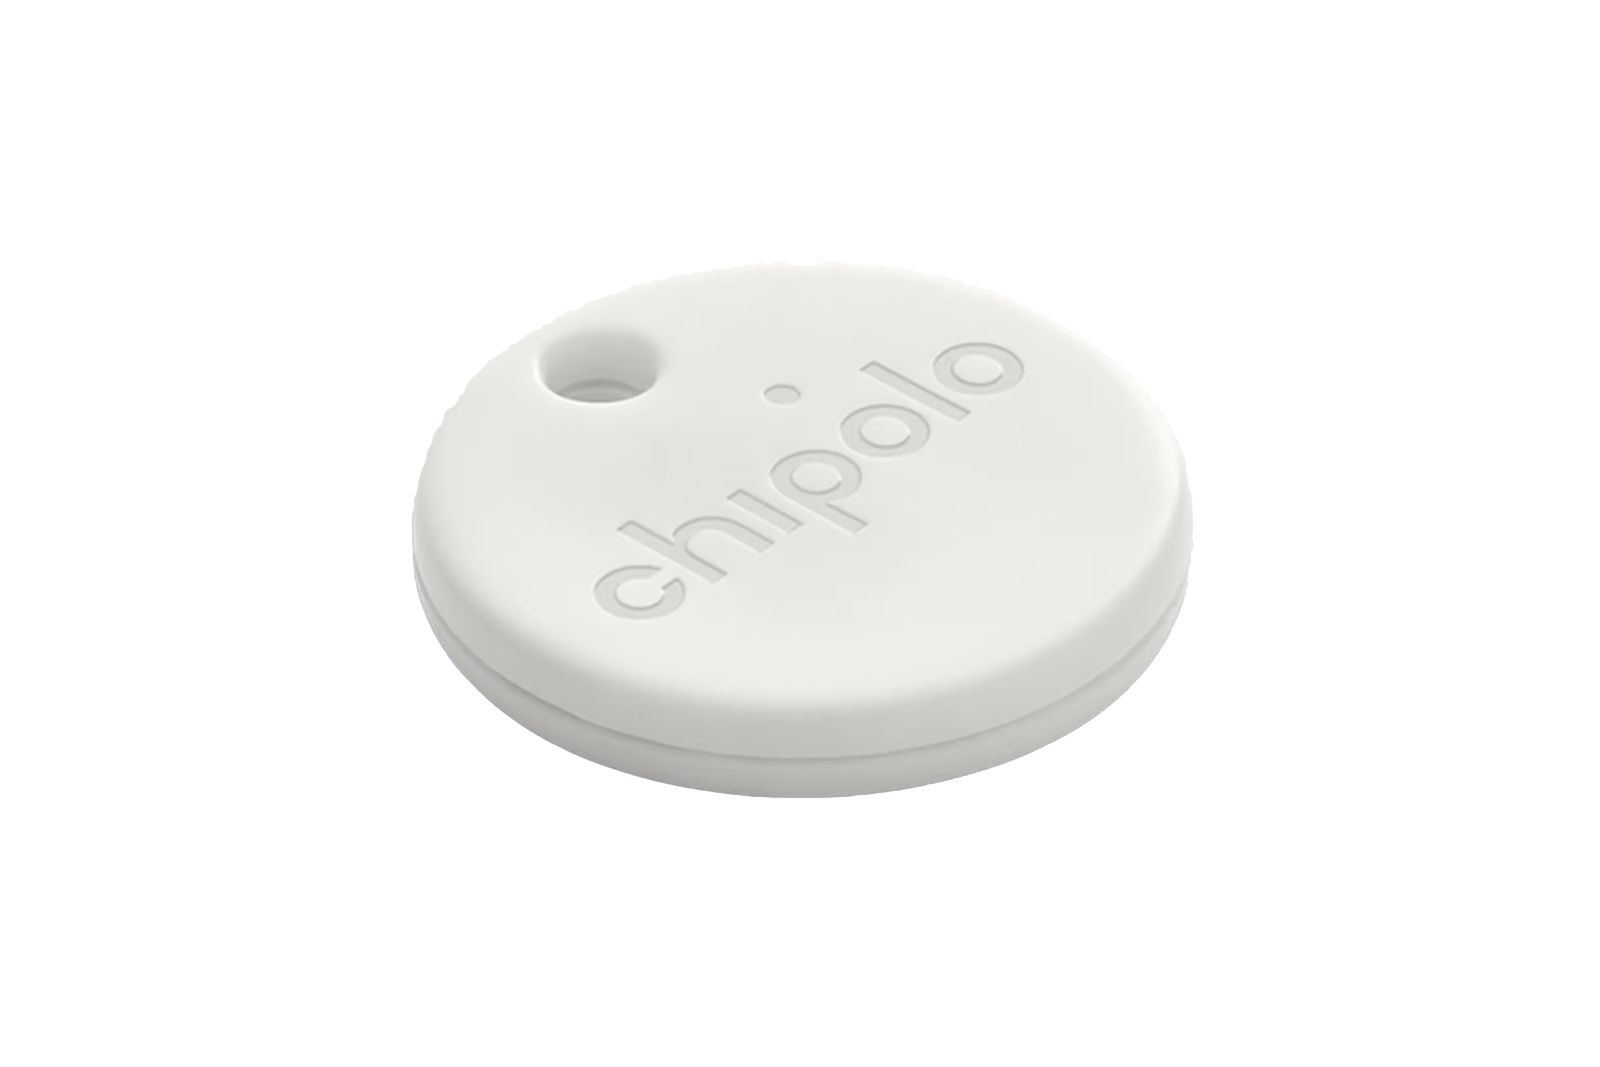 A white, circular tracker with a keyring hole at the top.